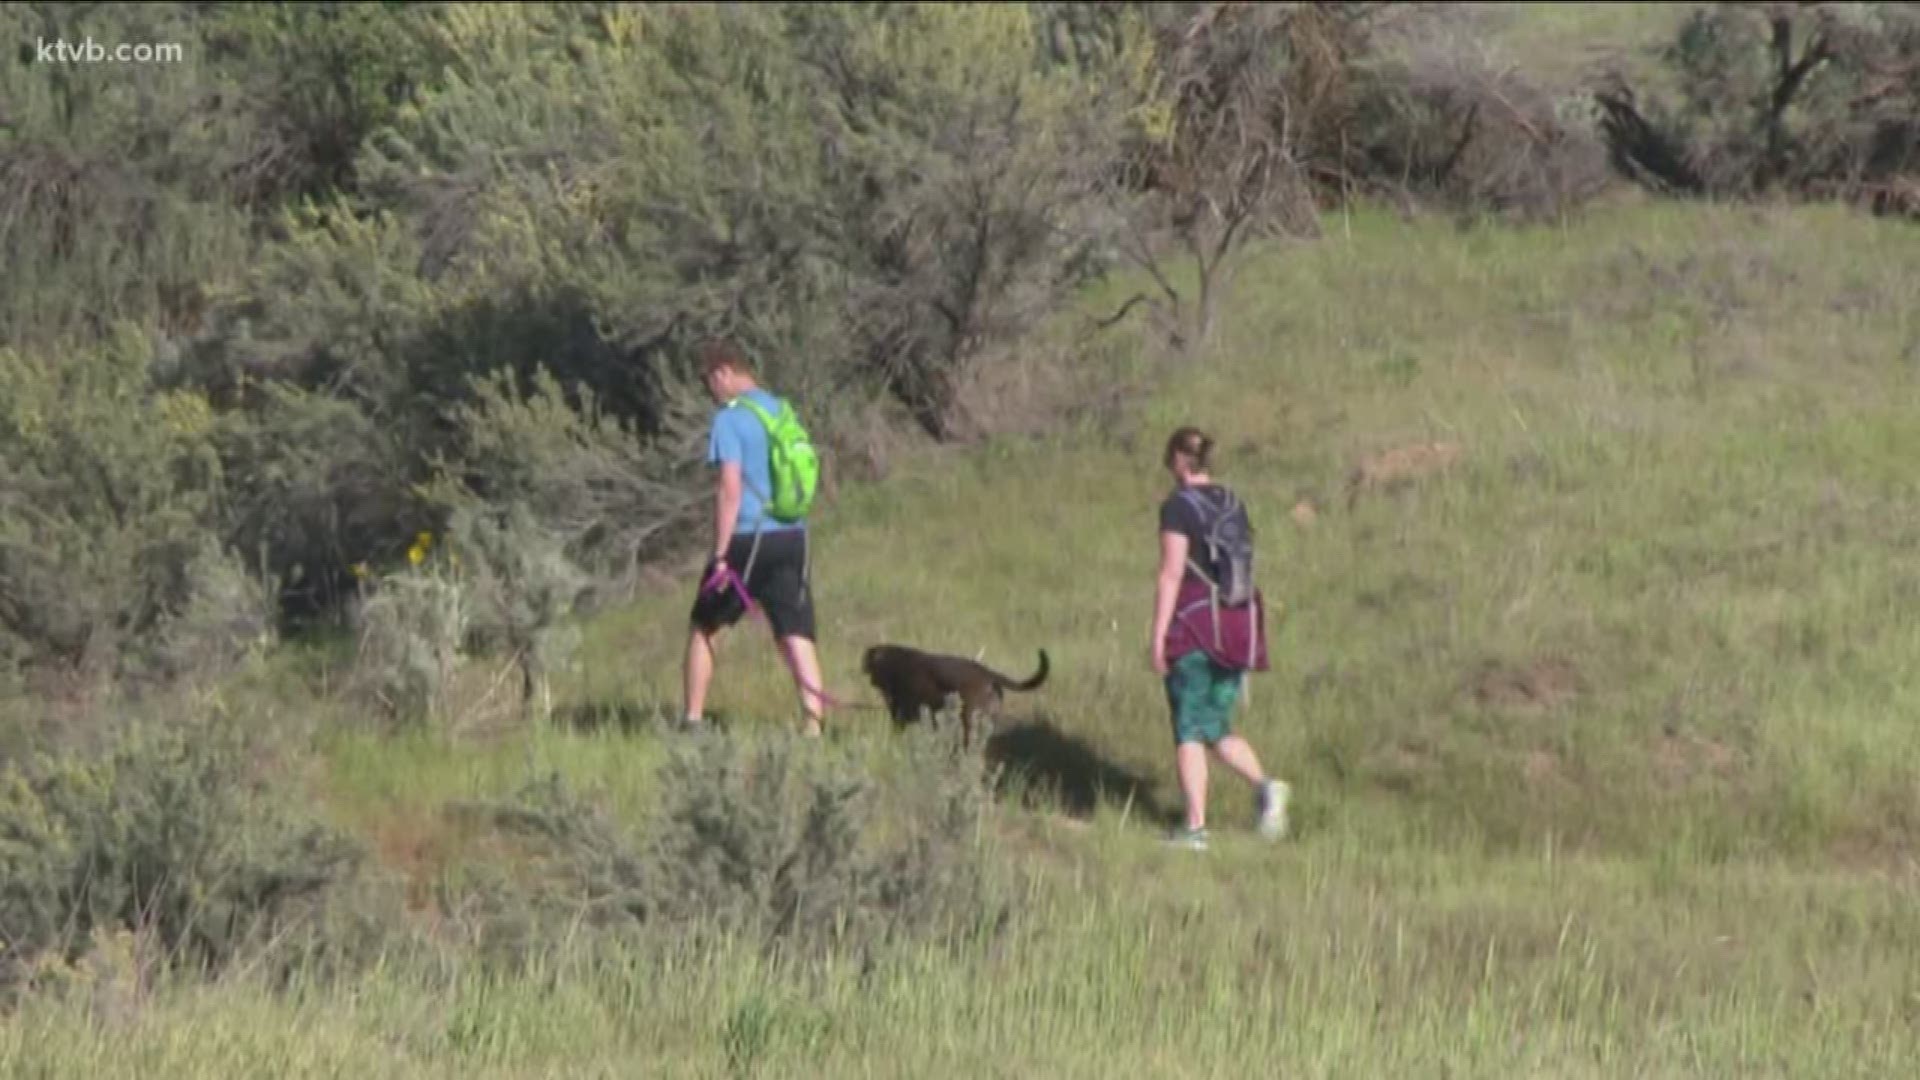 Boise Foothill hikers should be single file and always carry their dog’s leash. There’s also a plan for more bike-only trails.